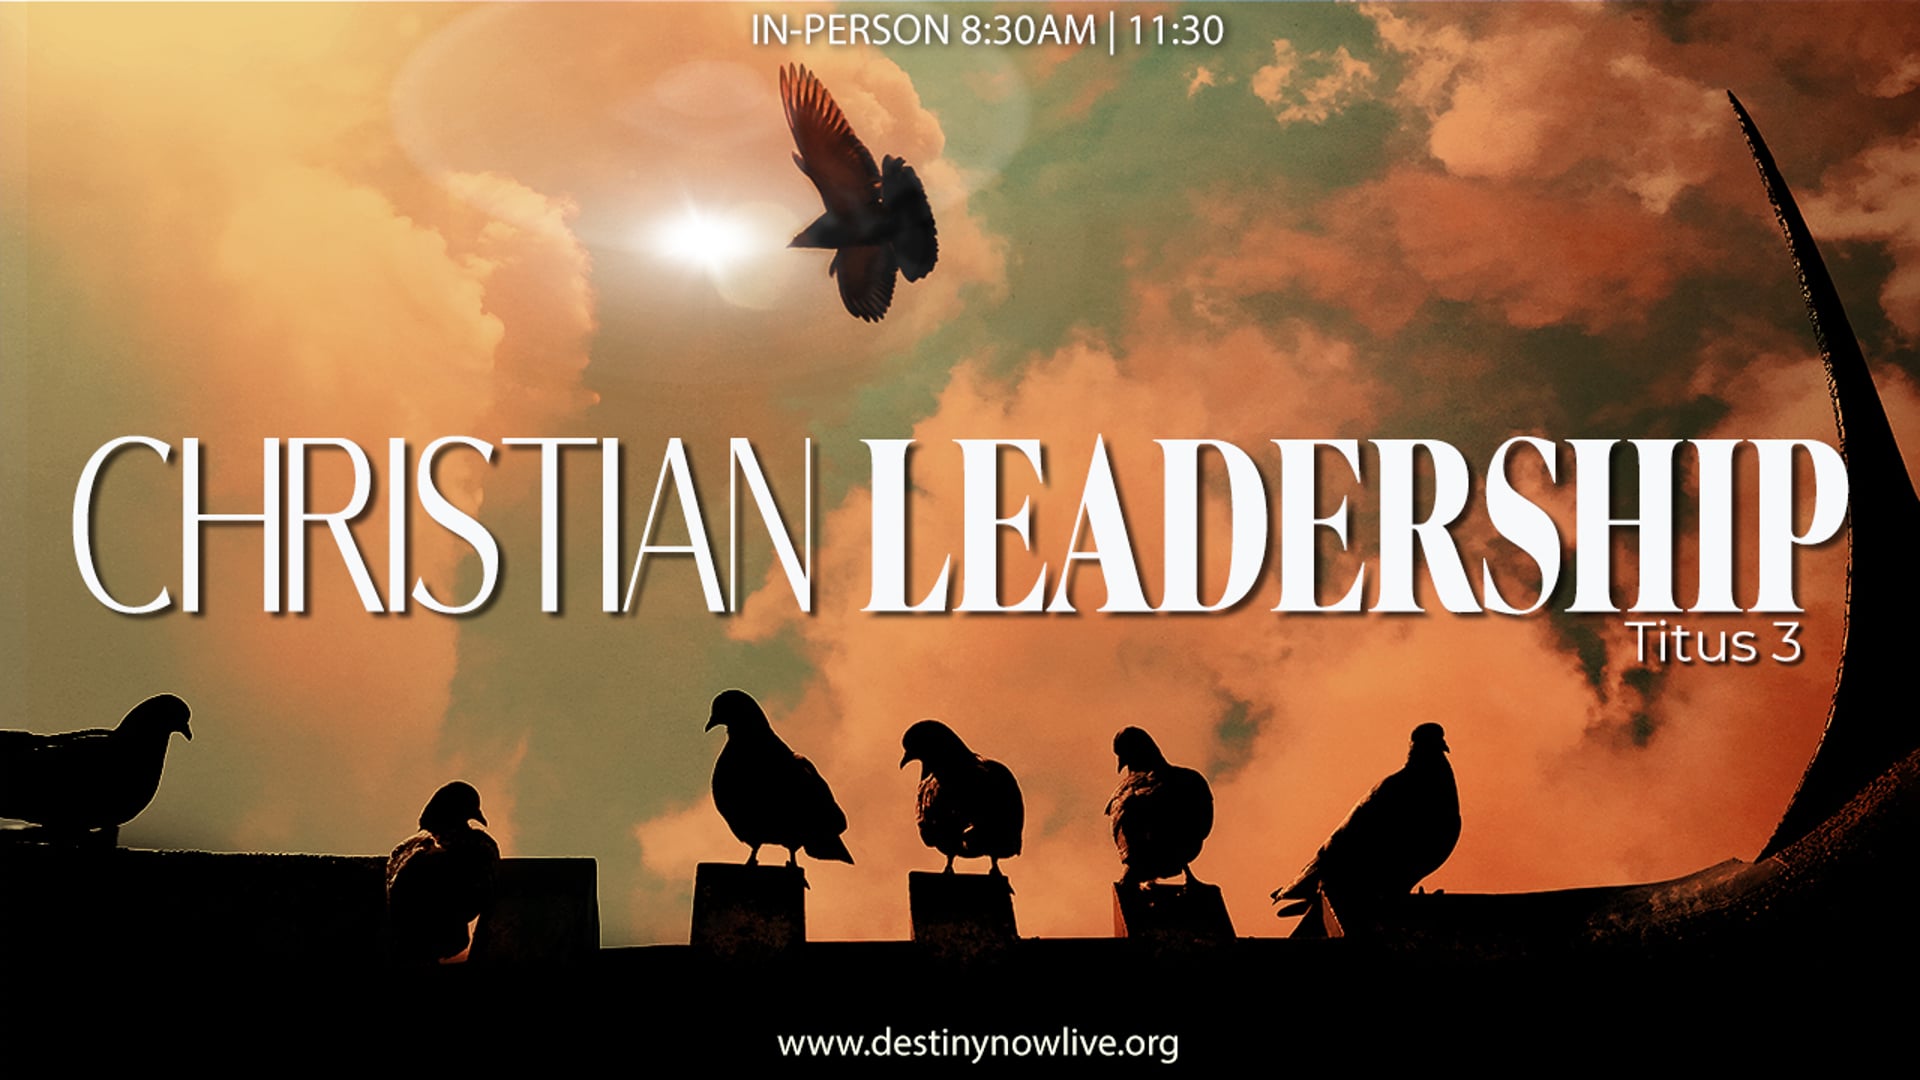 "Christian Leadership" - Online Giving: Text to give - 910-460-3377 - Give Online @ www.destinynow.org